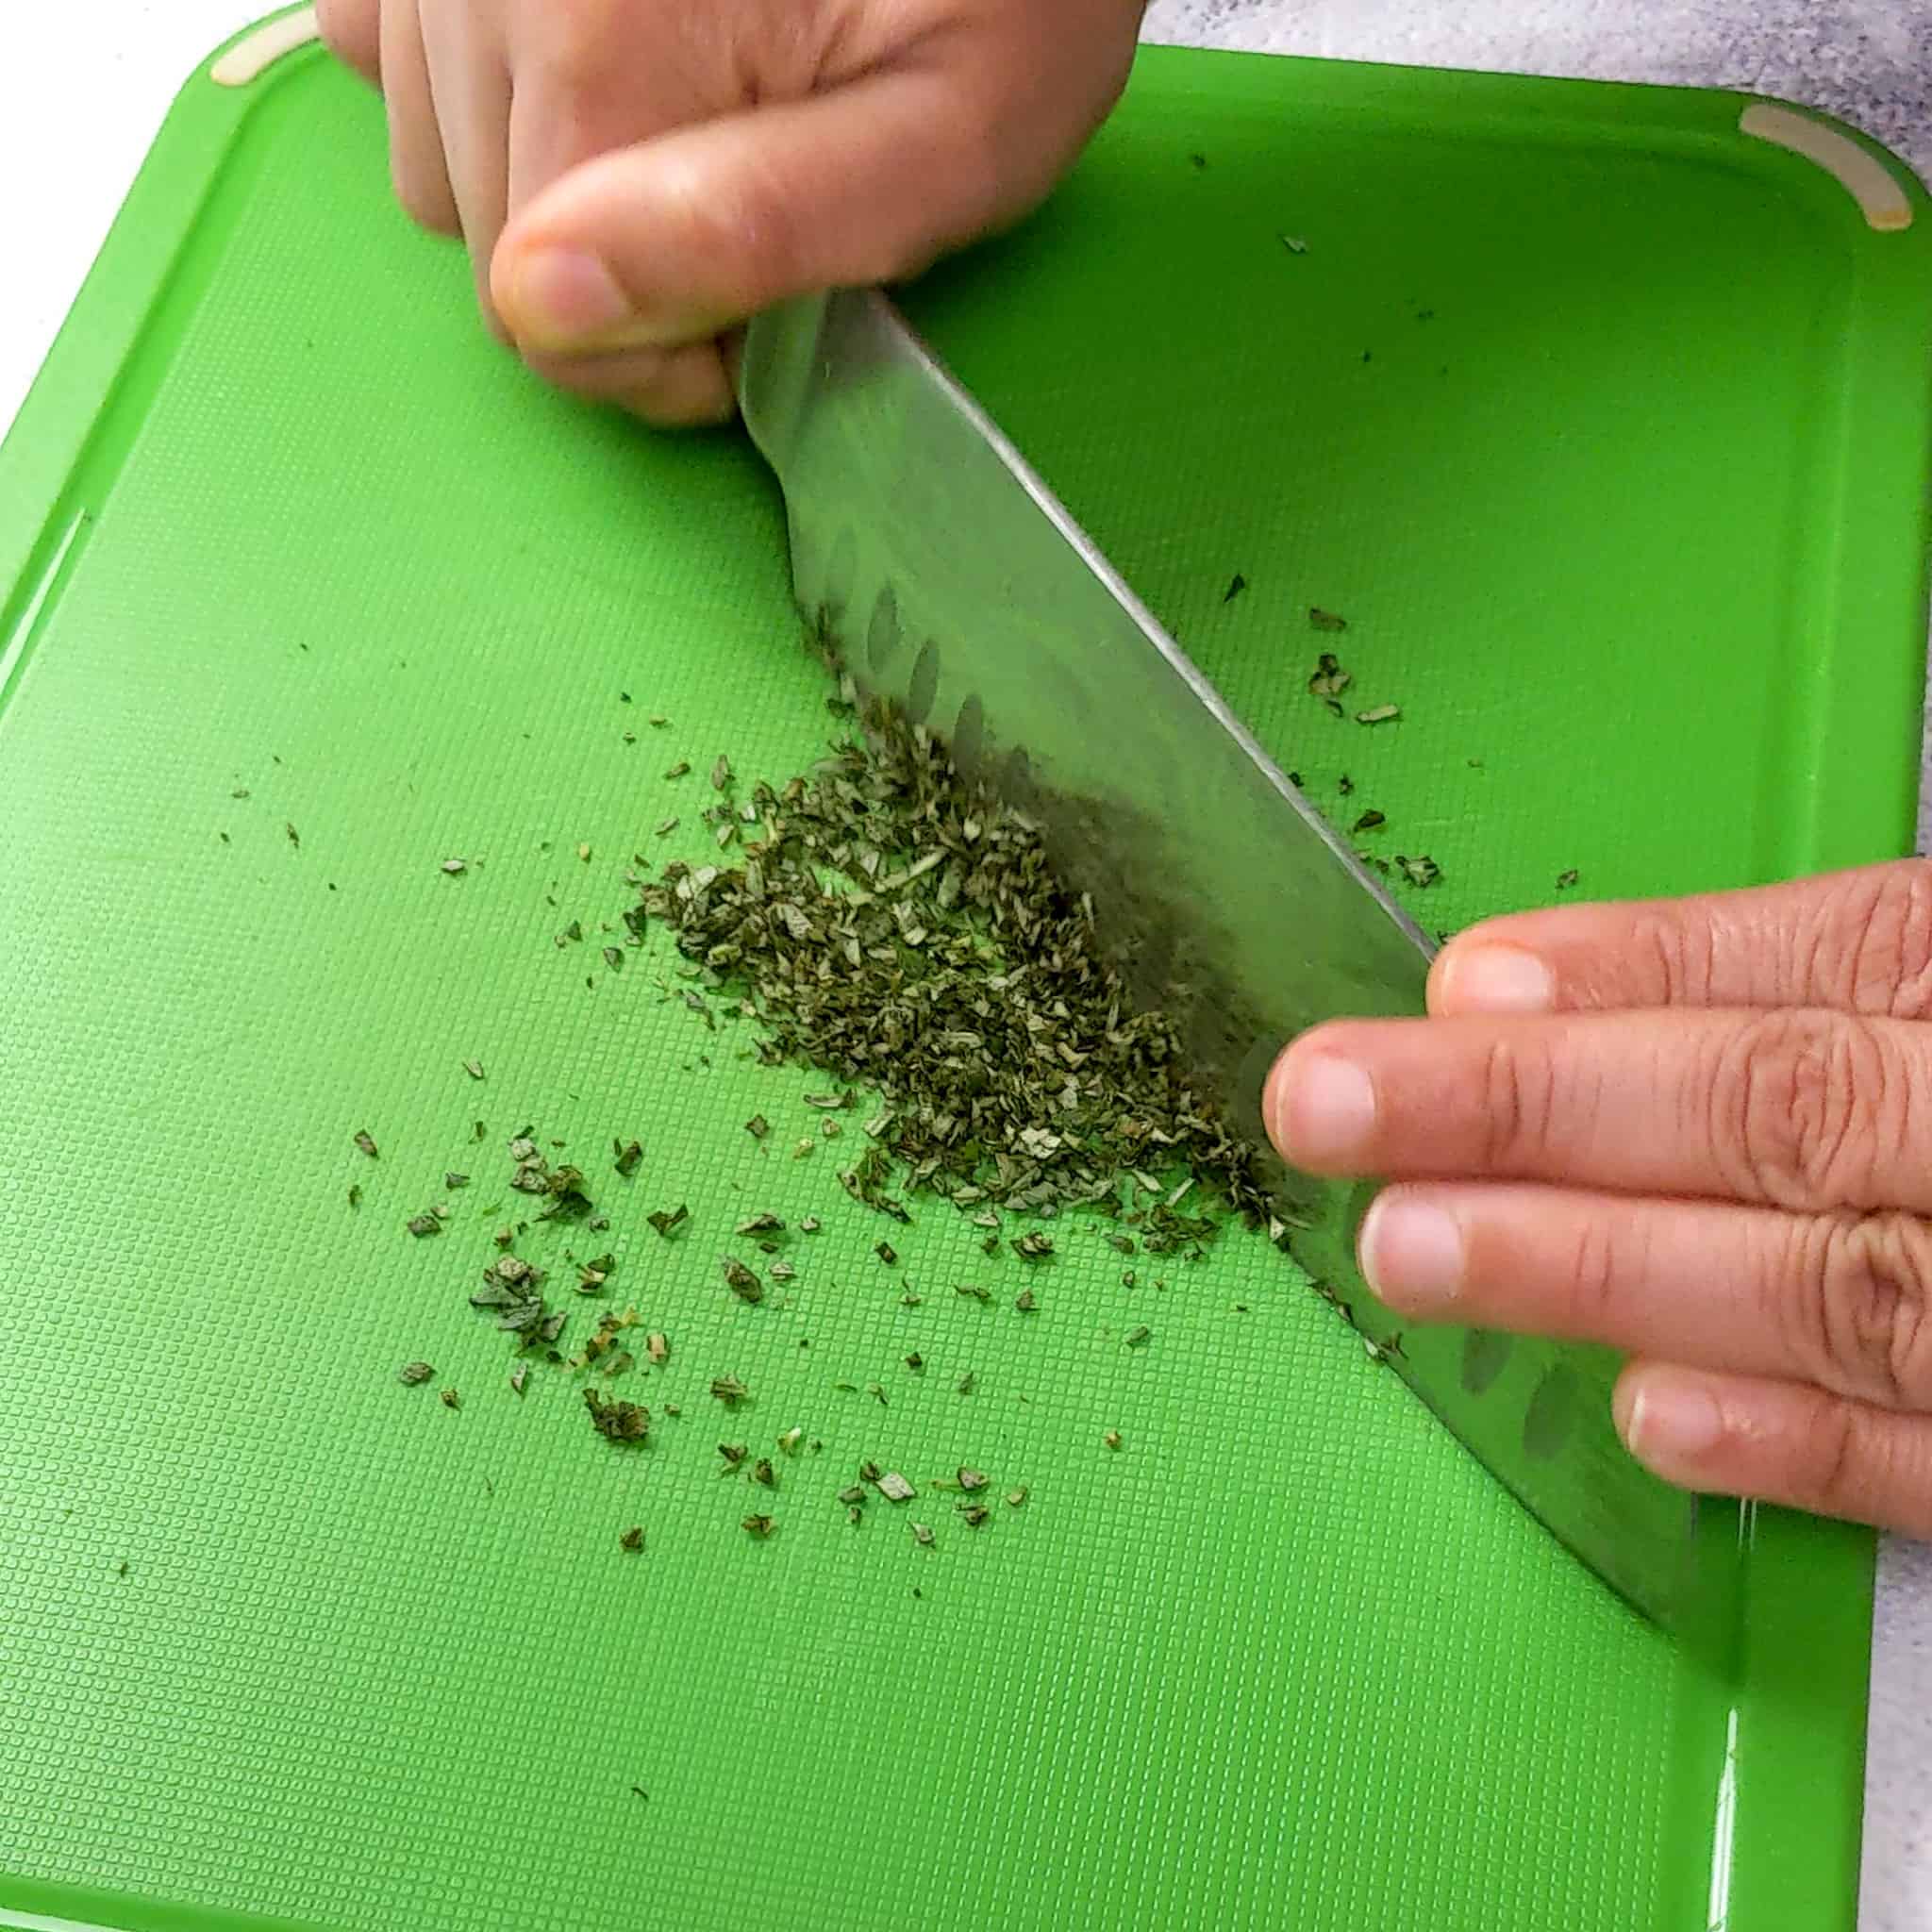 hands chopping fresh rosemary on a plastic color coded cutting board with a knife